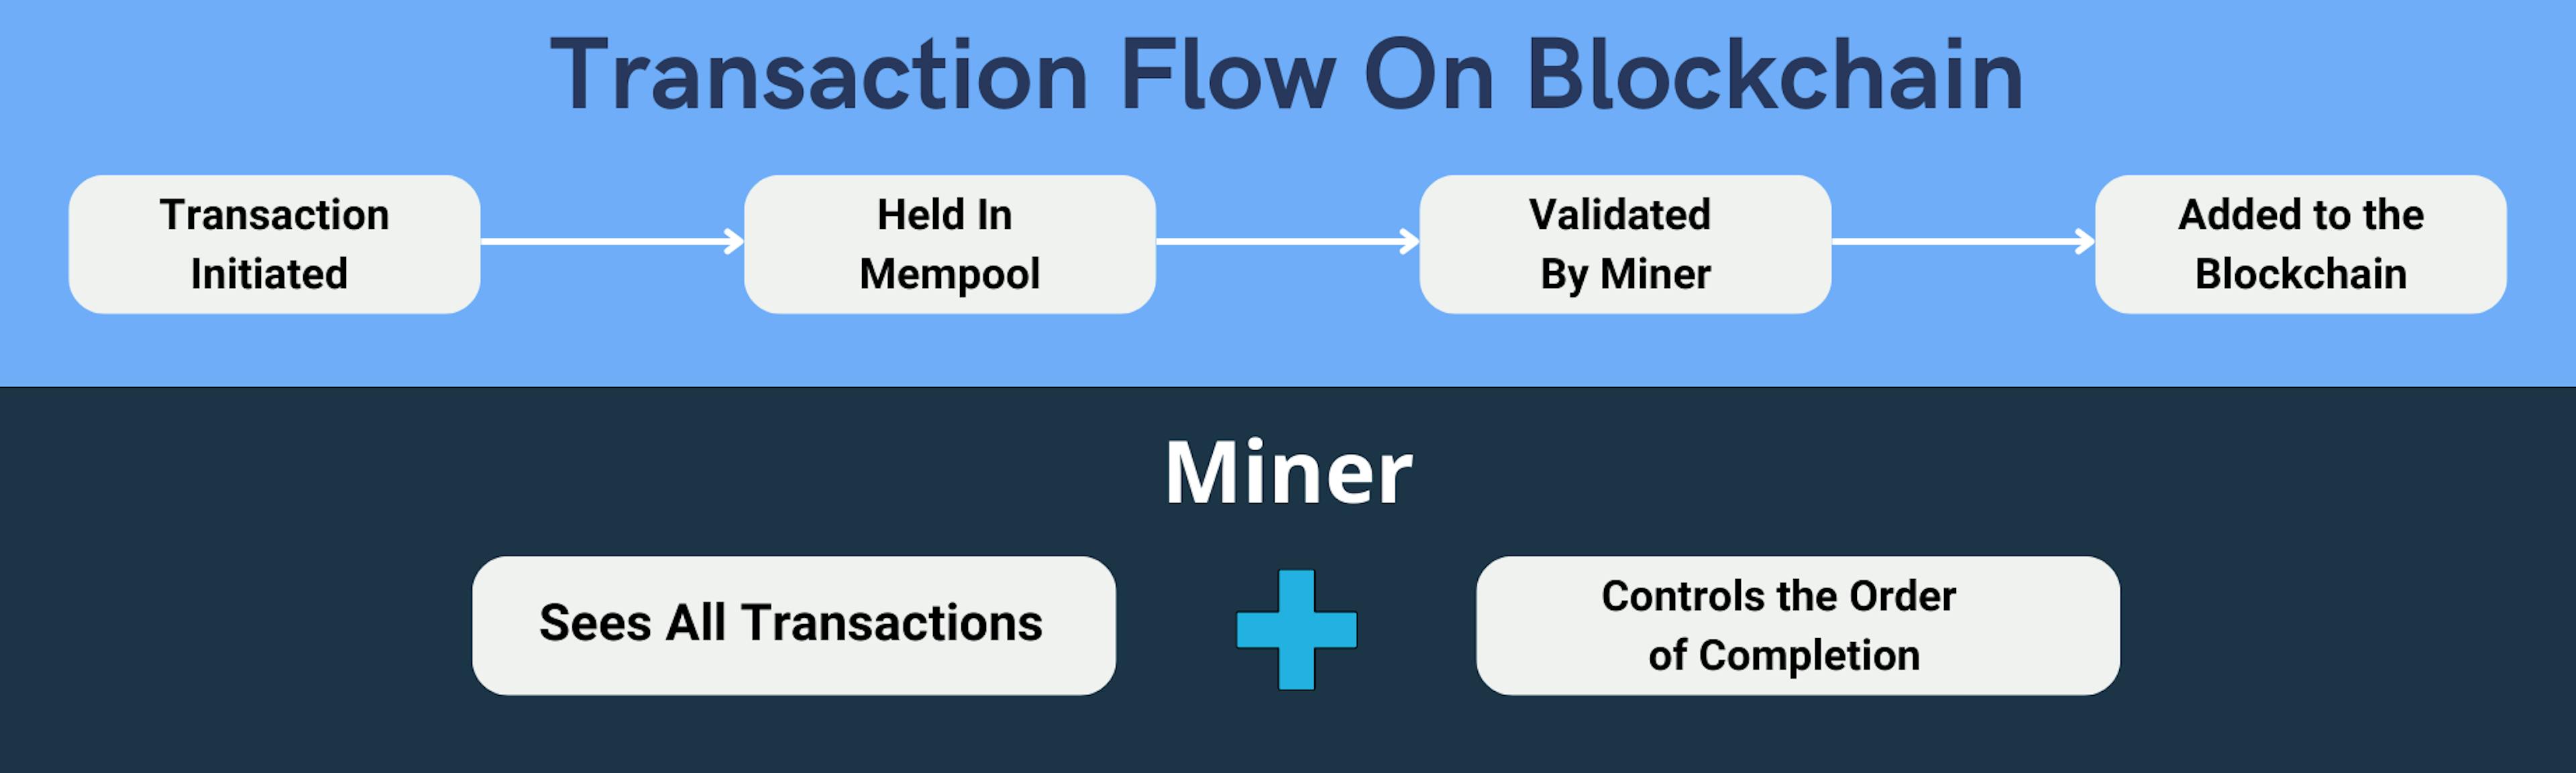 Blockchain Transaction Flow & Miners Roles - by ValueFirst with Canva from BlockWallet